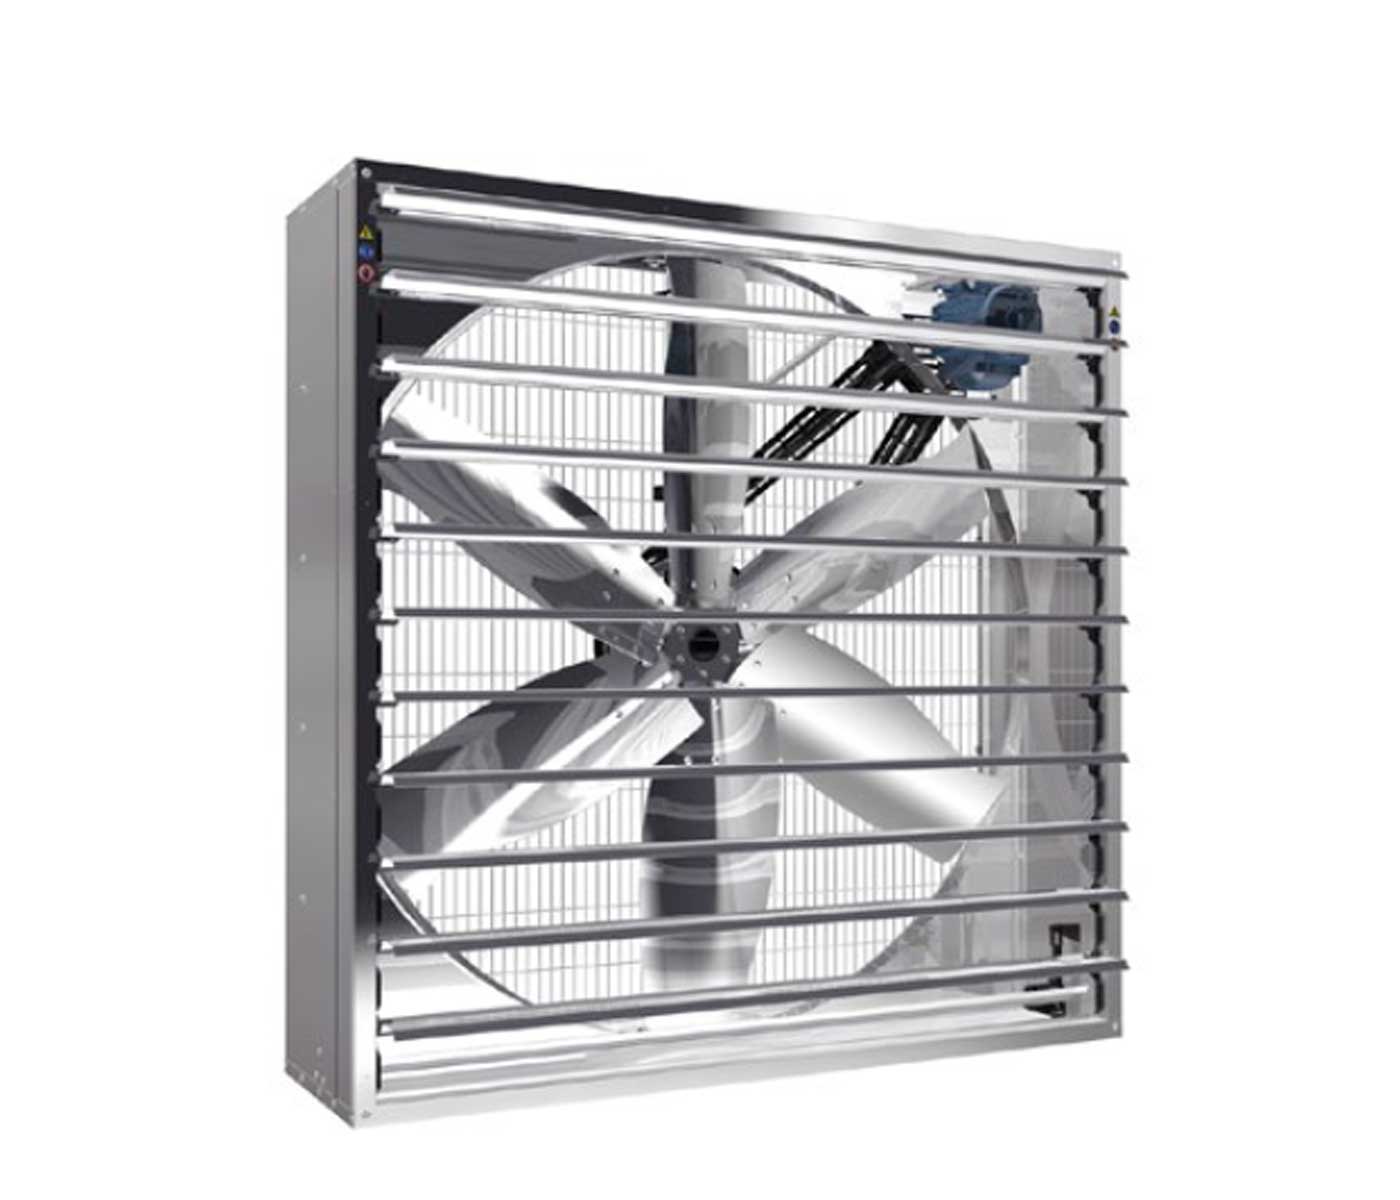 Comparison of Shutter Blade Opening Systems in Exhaust Fans: Focus...